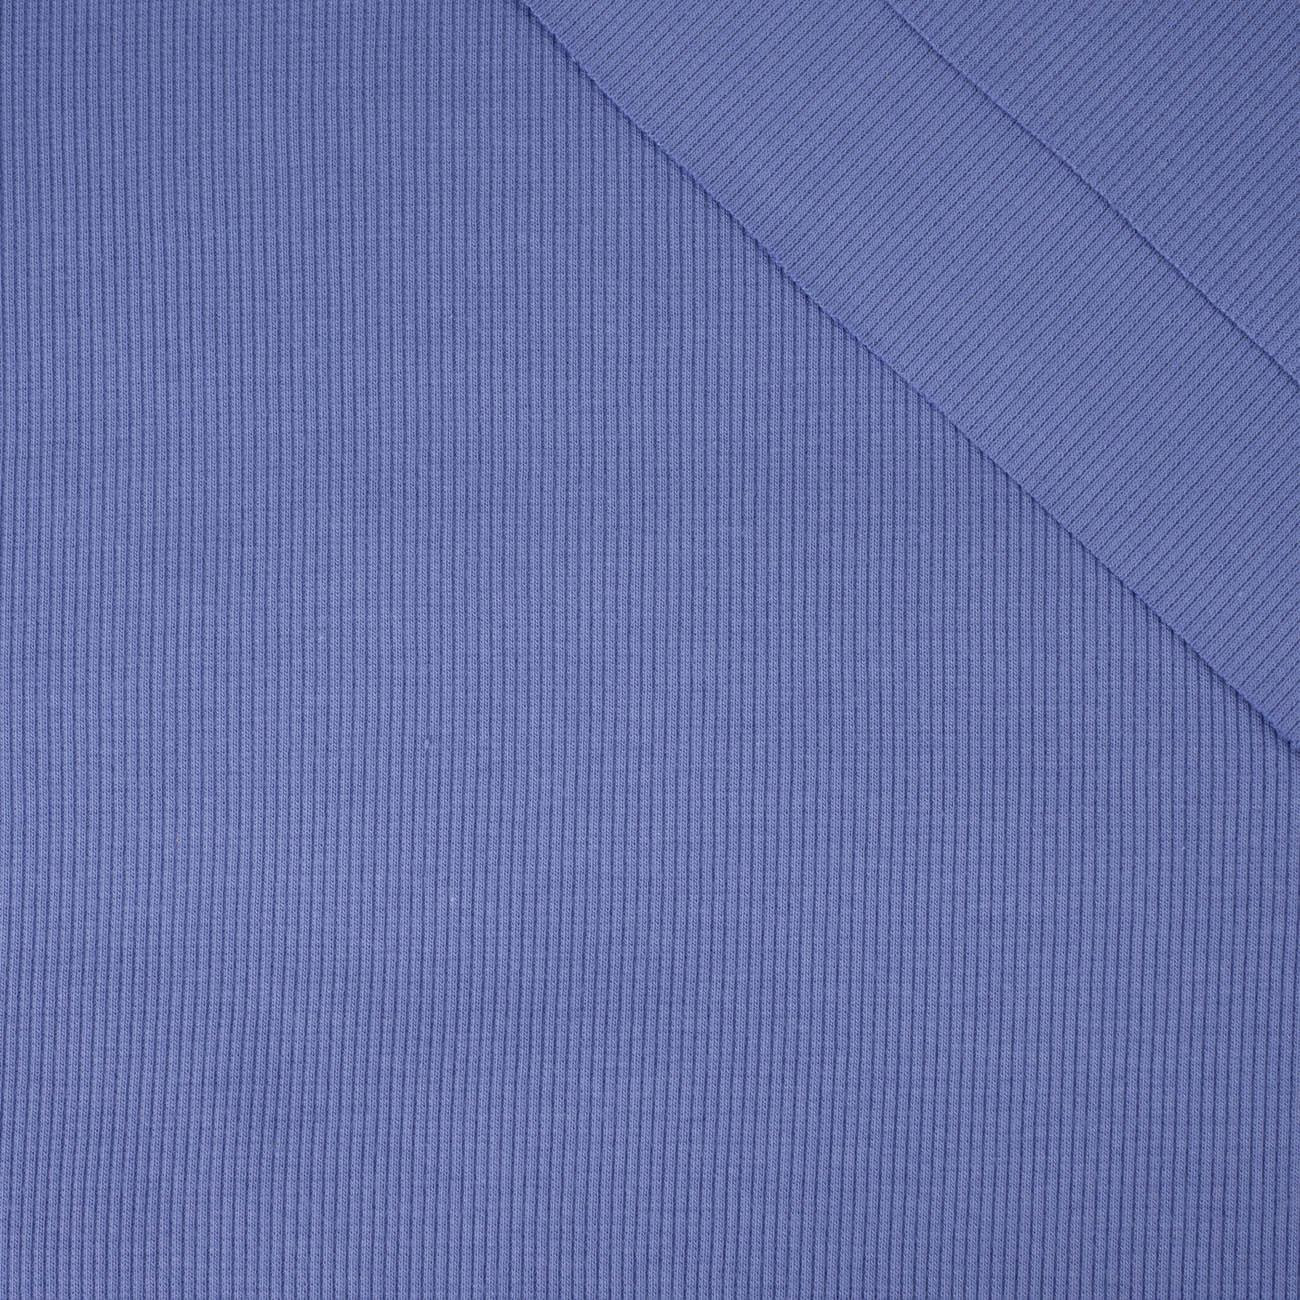 D-123 PURPLE - Ribbed knit fabric